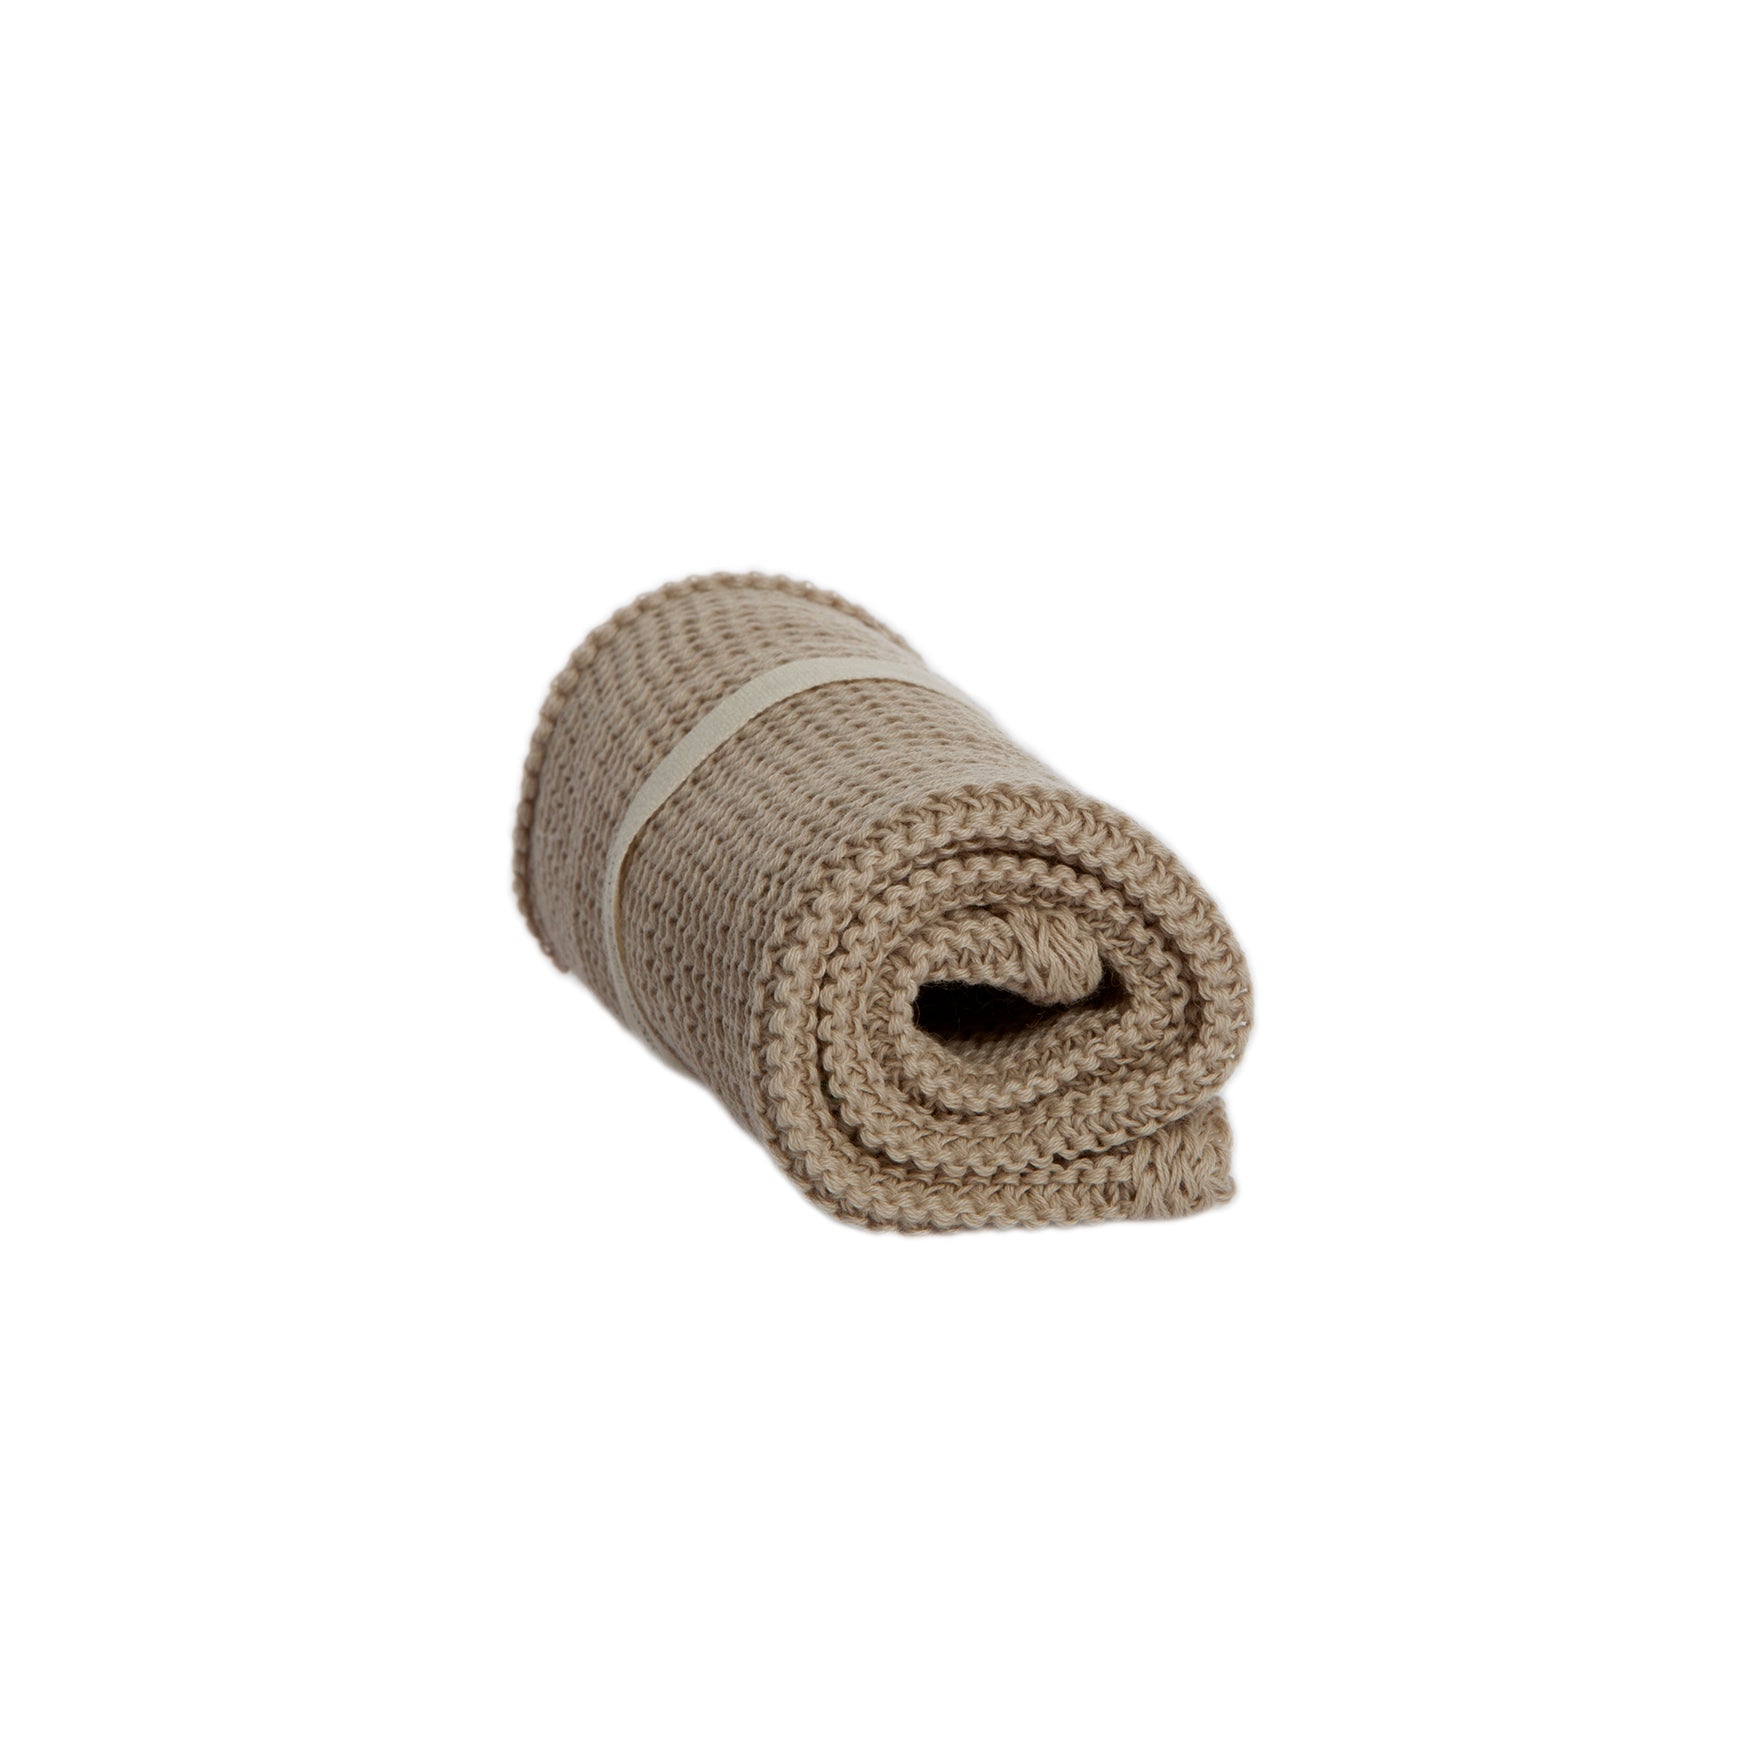 Ultra-soft knitted organic cotton washcloth in natural color